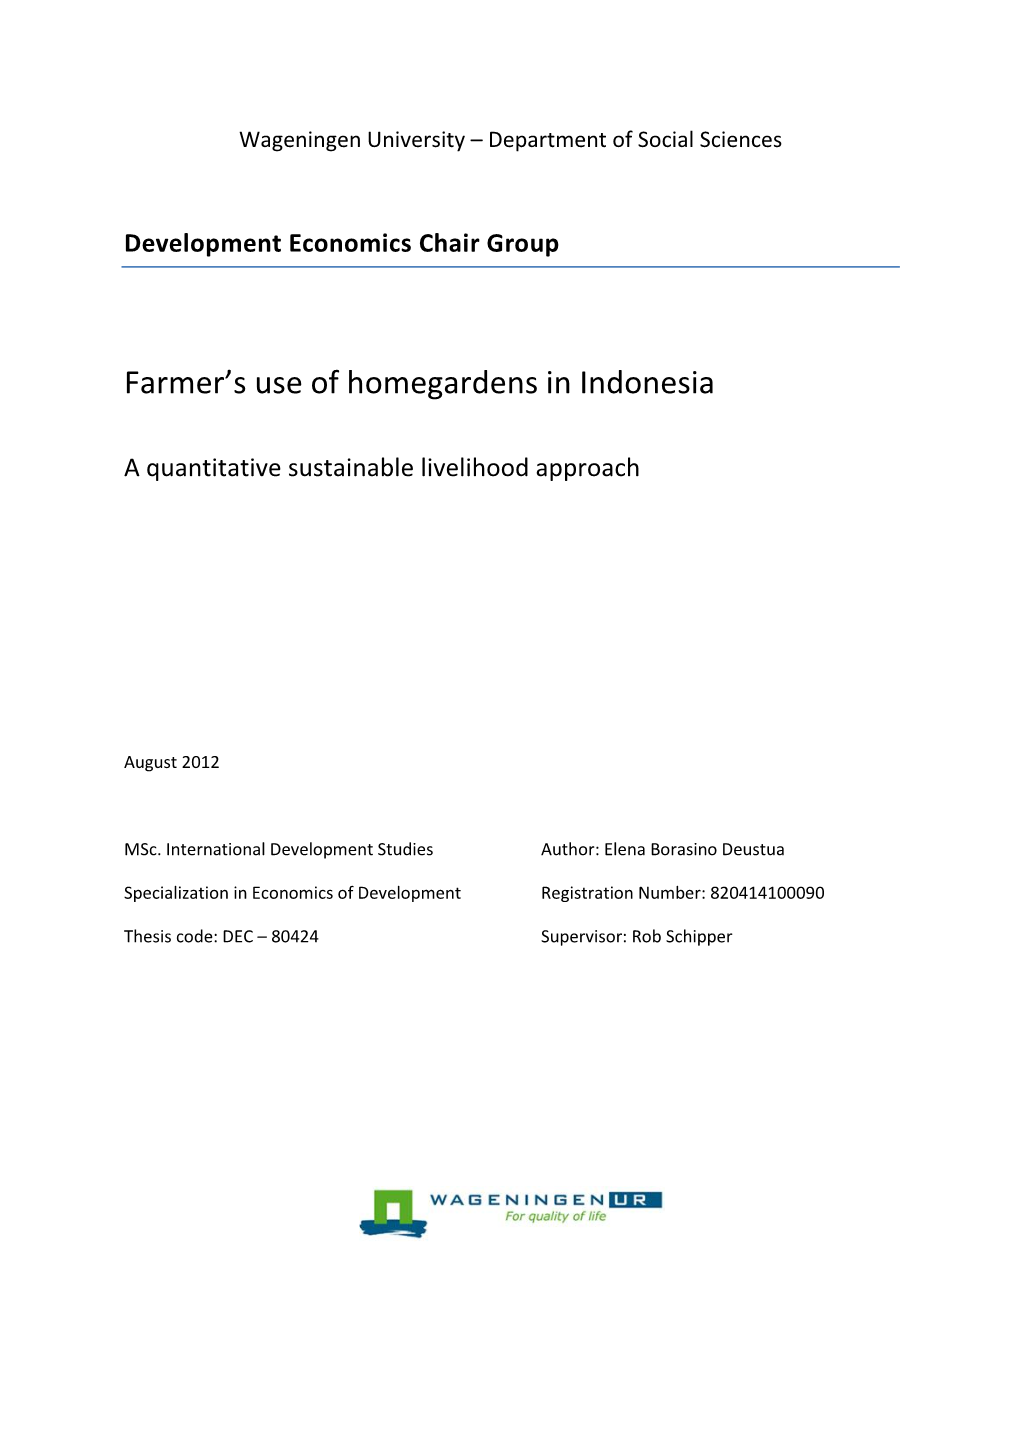 Farmer's Use of Homegardens in Indonesia